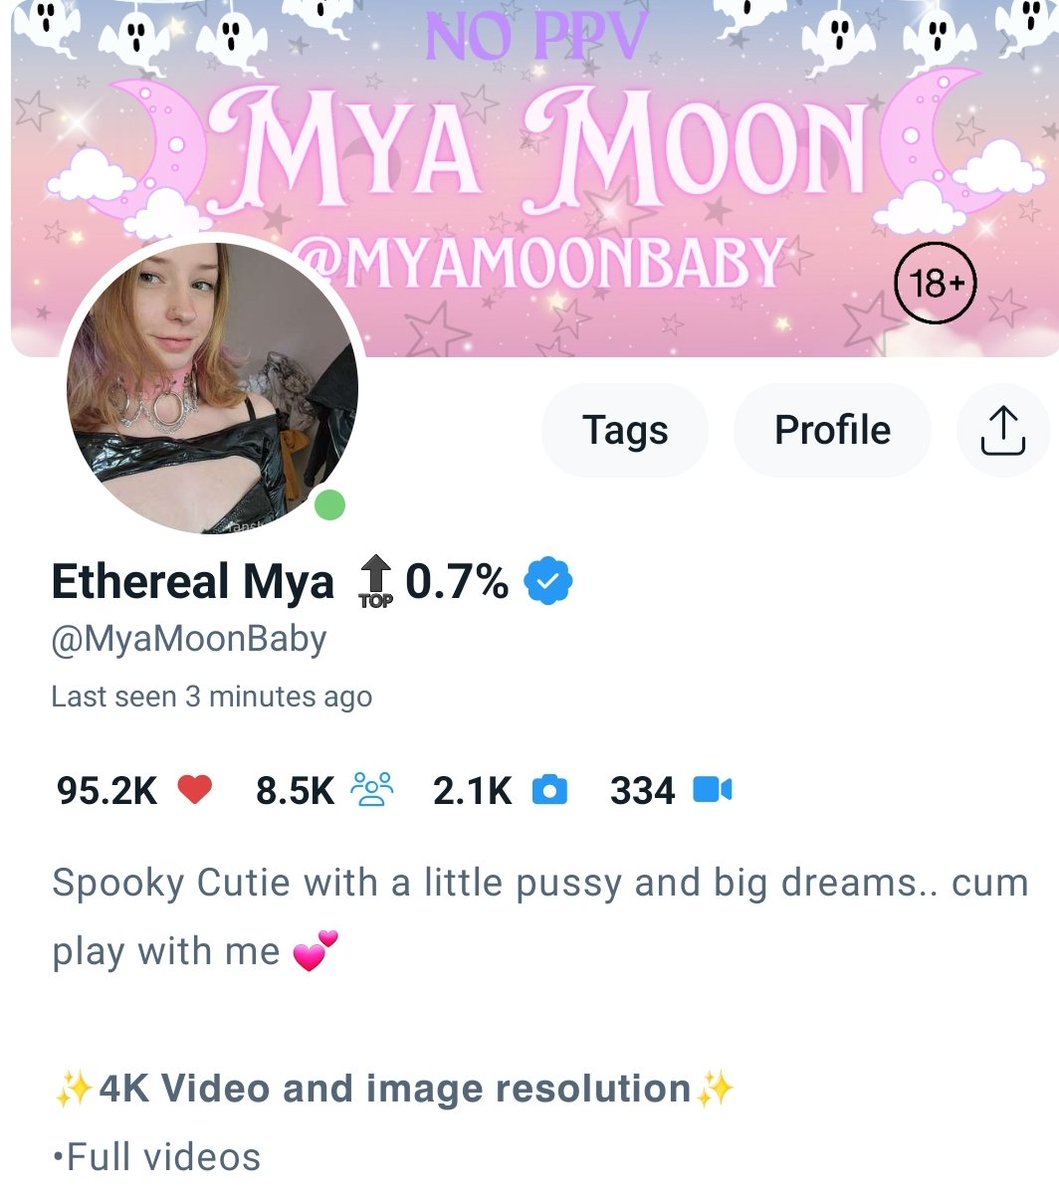 ✨️Cum play with me ✨️ Over 2400 full videos in 4K and media to access instantly ♡ $5 Onlyfans ♡ ♡ $10 Fansly ♡ msha.ke/etherealmya